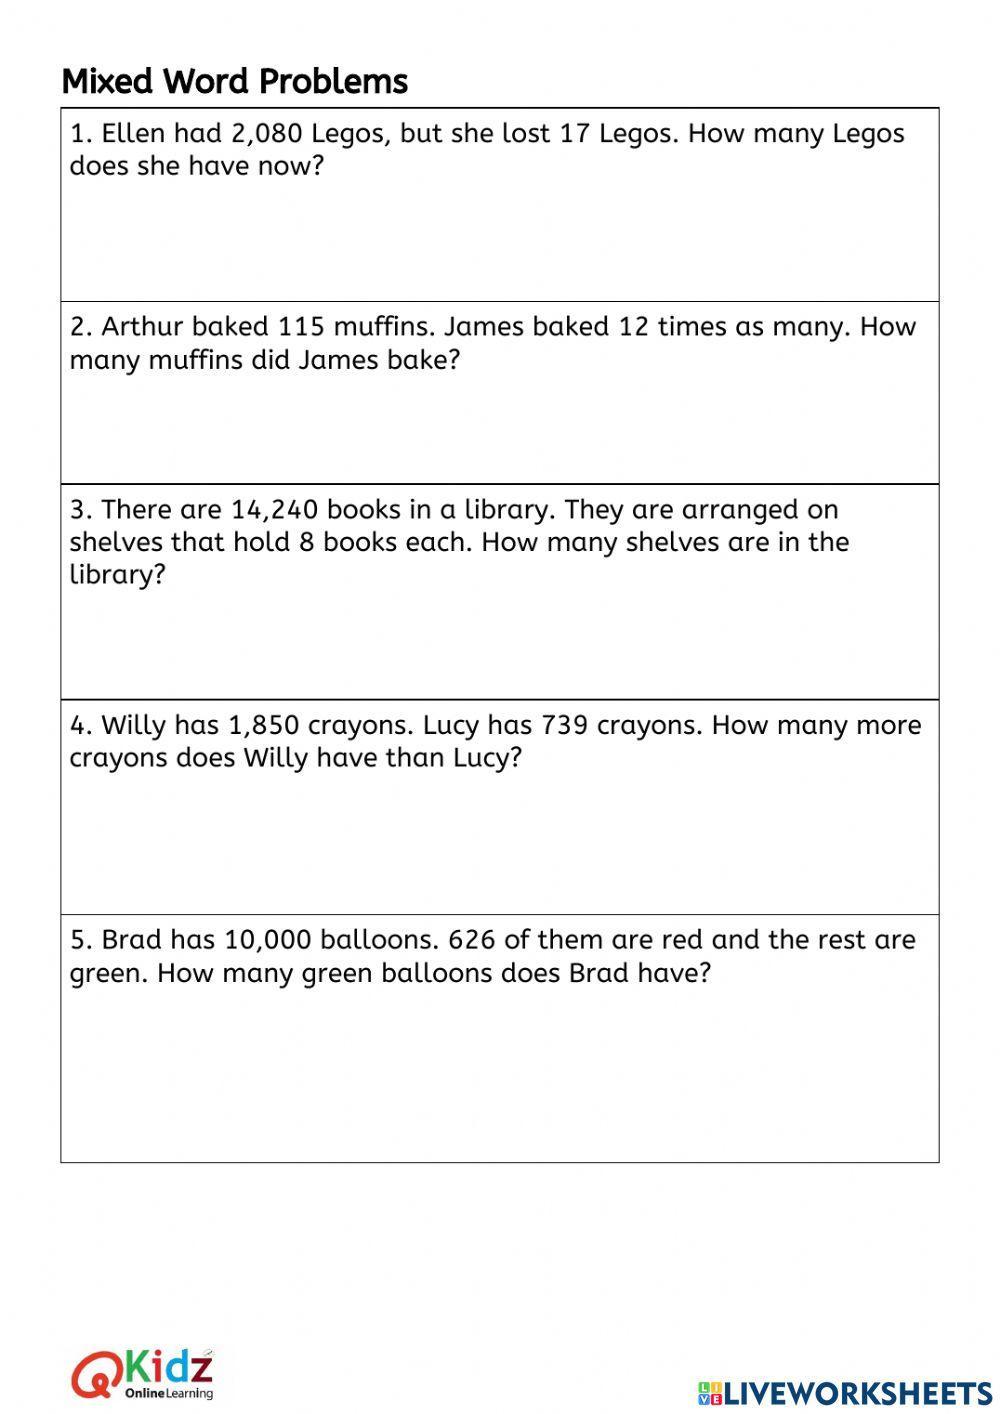 Mixed Word Problems for Year 3